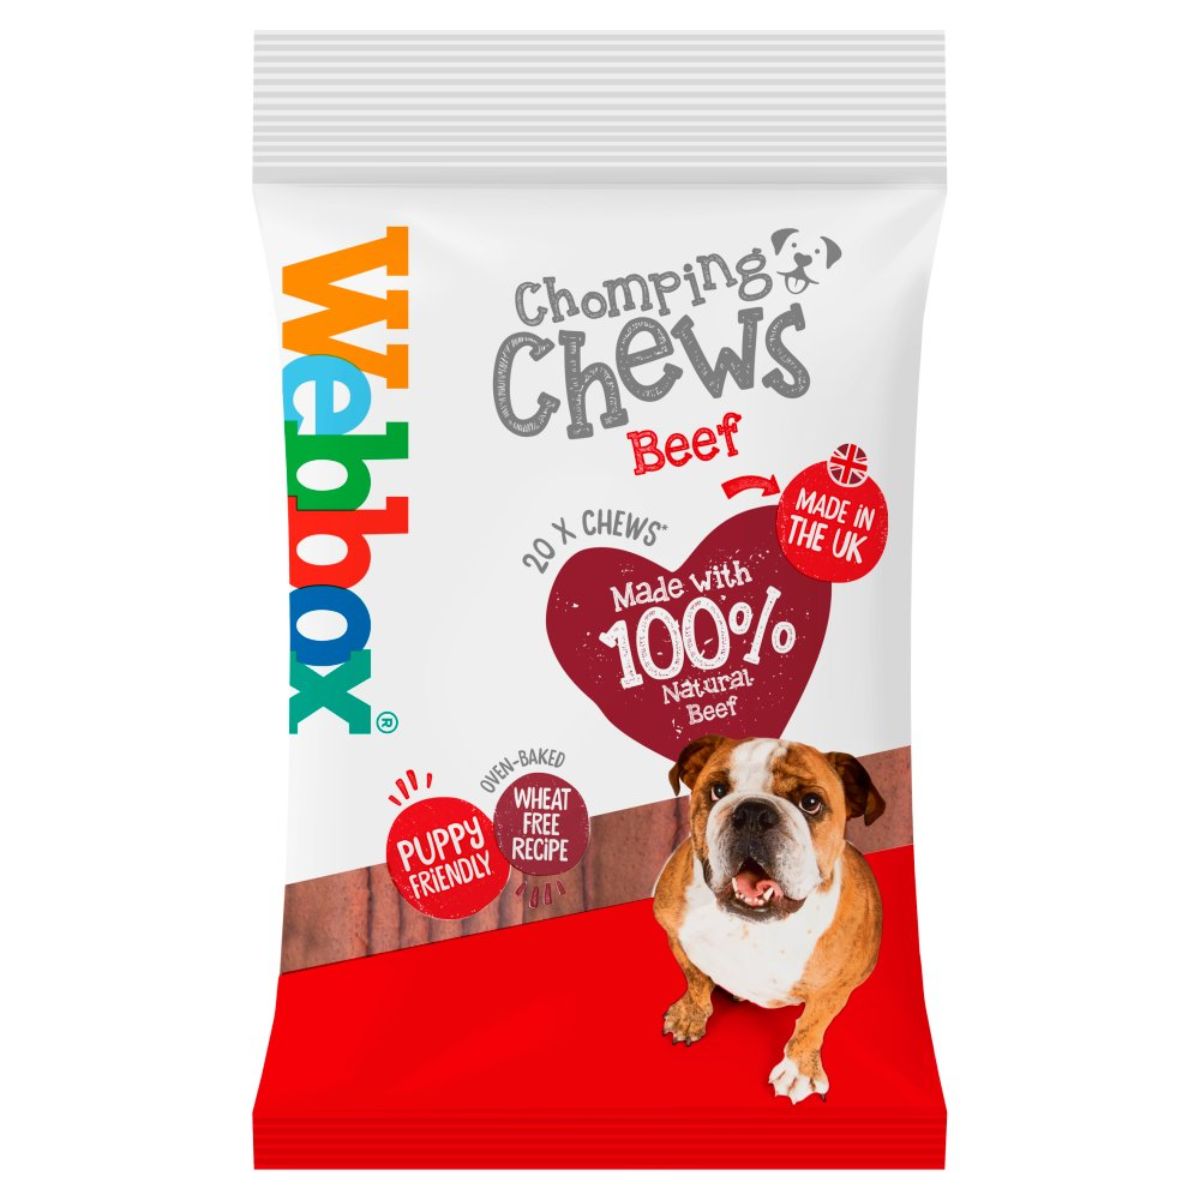 A bag of Webbox - 20 Chomping Chews Beef - 200g with a dog on it.